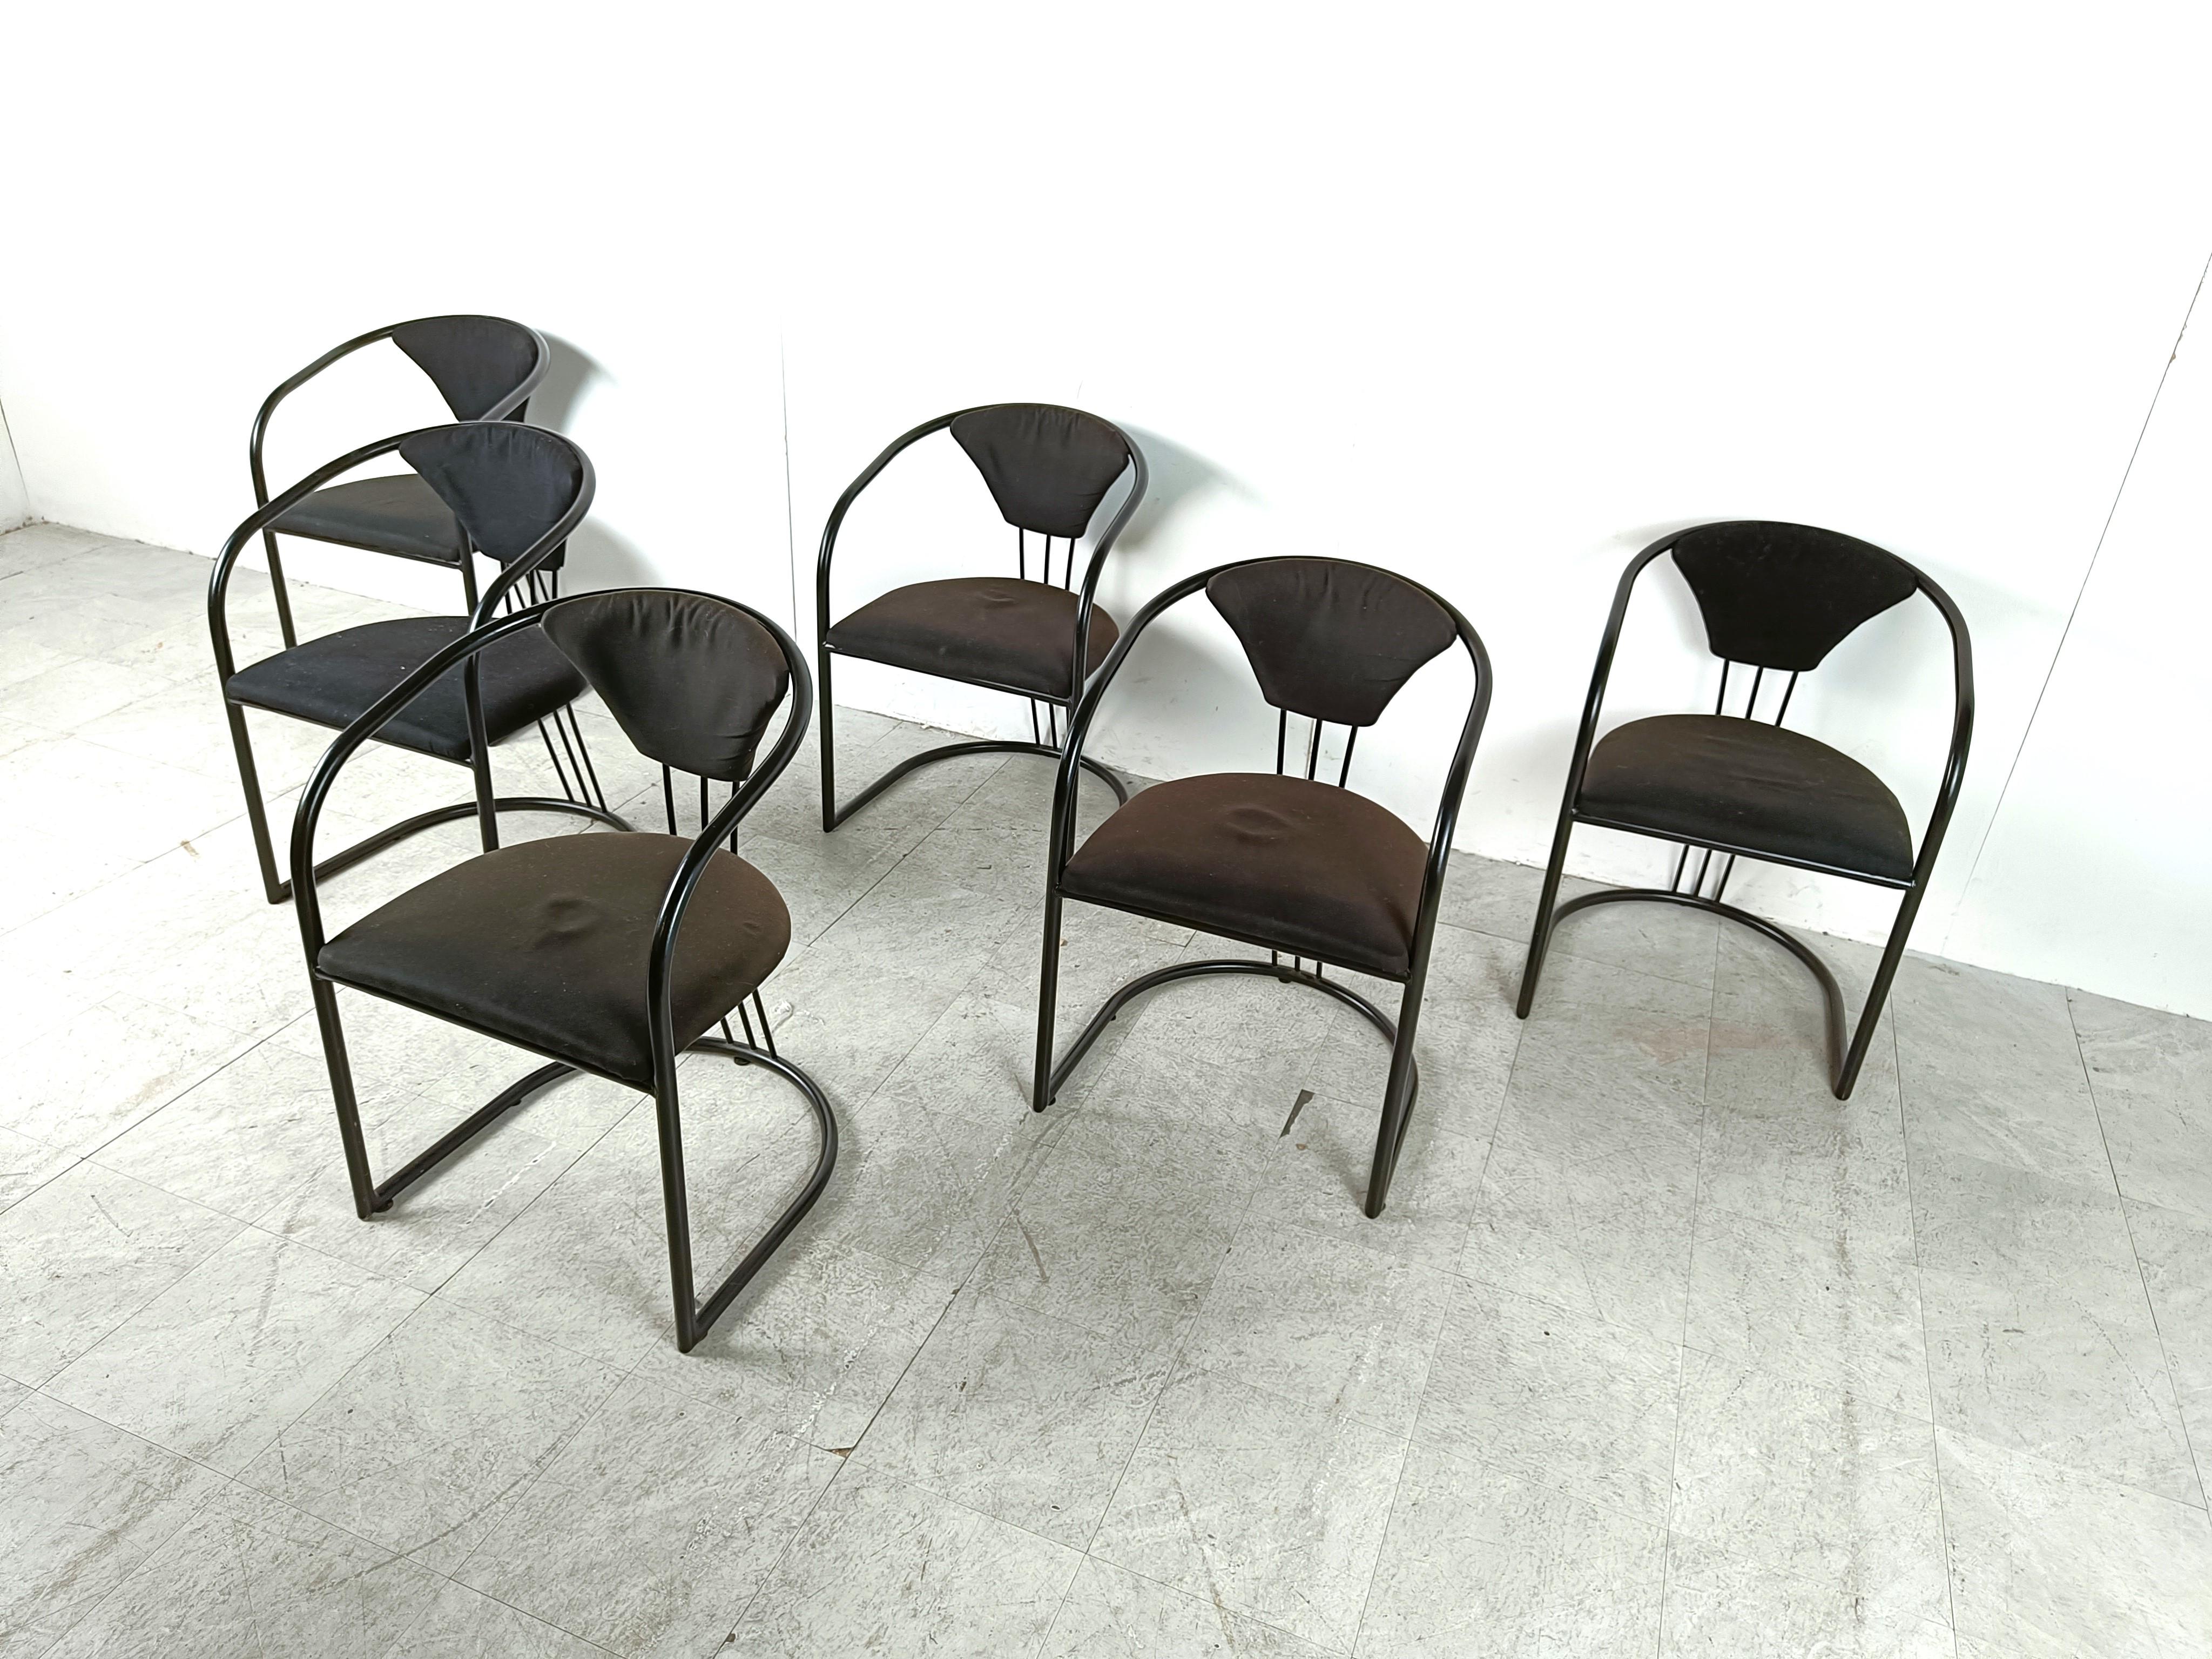 Late 20th Century Italian Postmodern dining chairs, 1980s - set of 6 For Sale